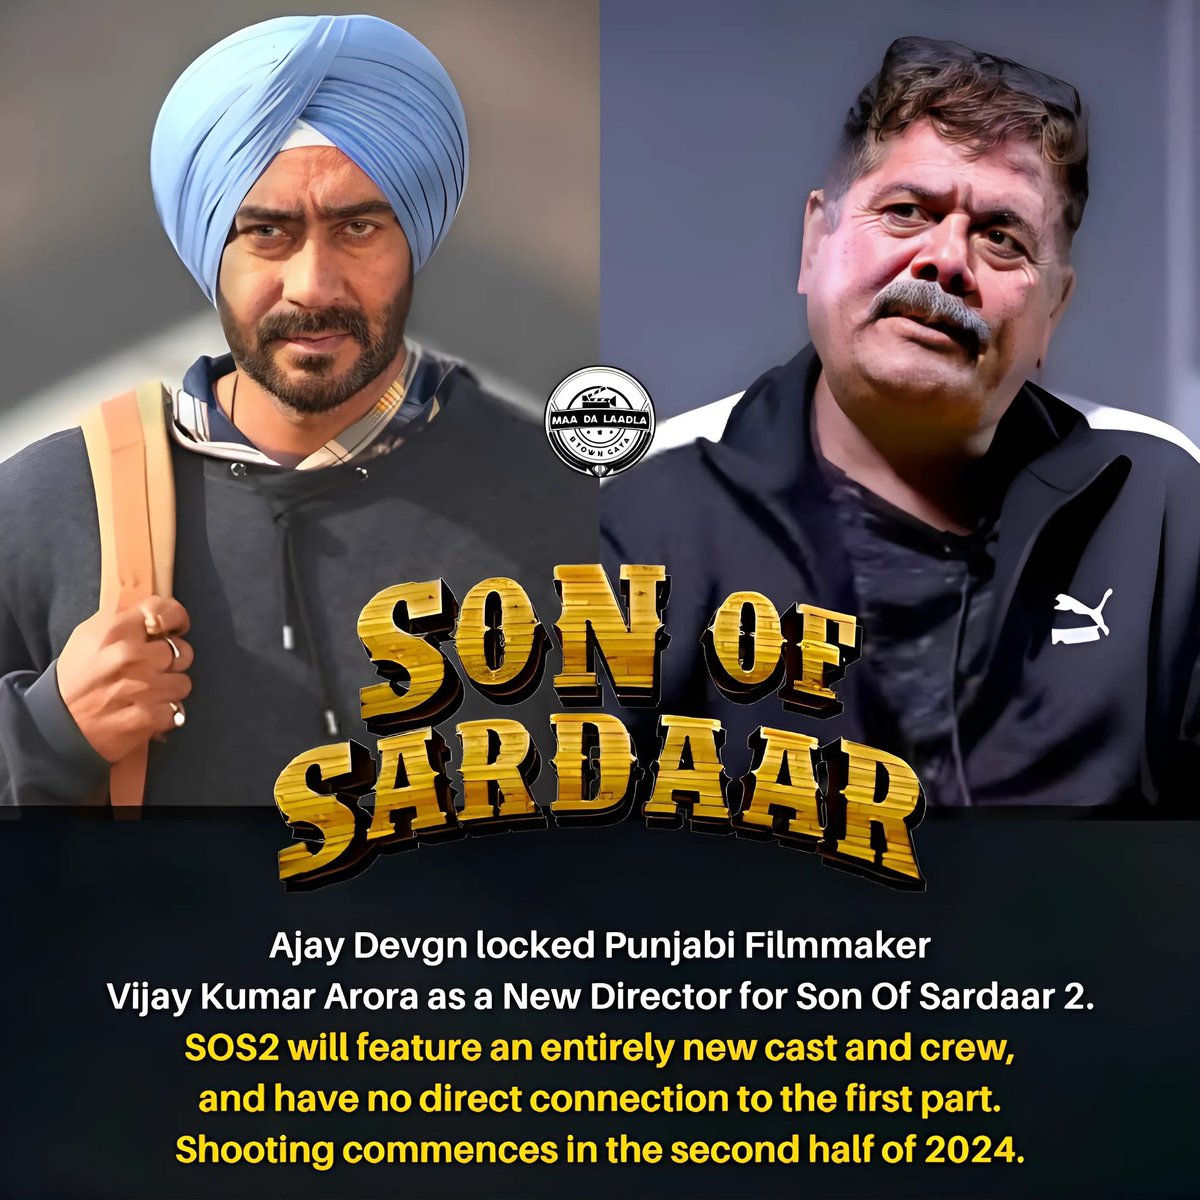 #AjayDevgn locked #Punjabi filmmaker #VijayKumarArora as a new director for #SonOfSardaar2. #SOS2 will feature an entirely new cast and crew, and have no direct connection to the first part. 😎🔥

Shooting commences in the second half of 2024. Currently in the pre-production